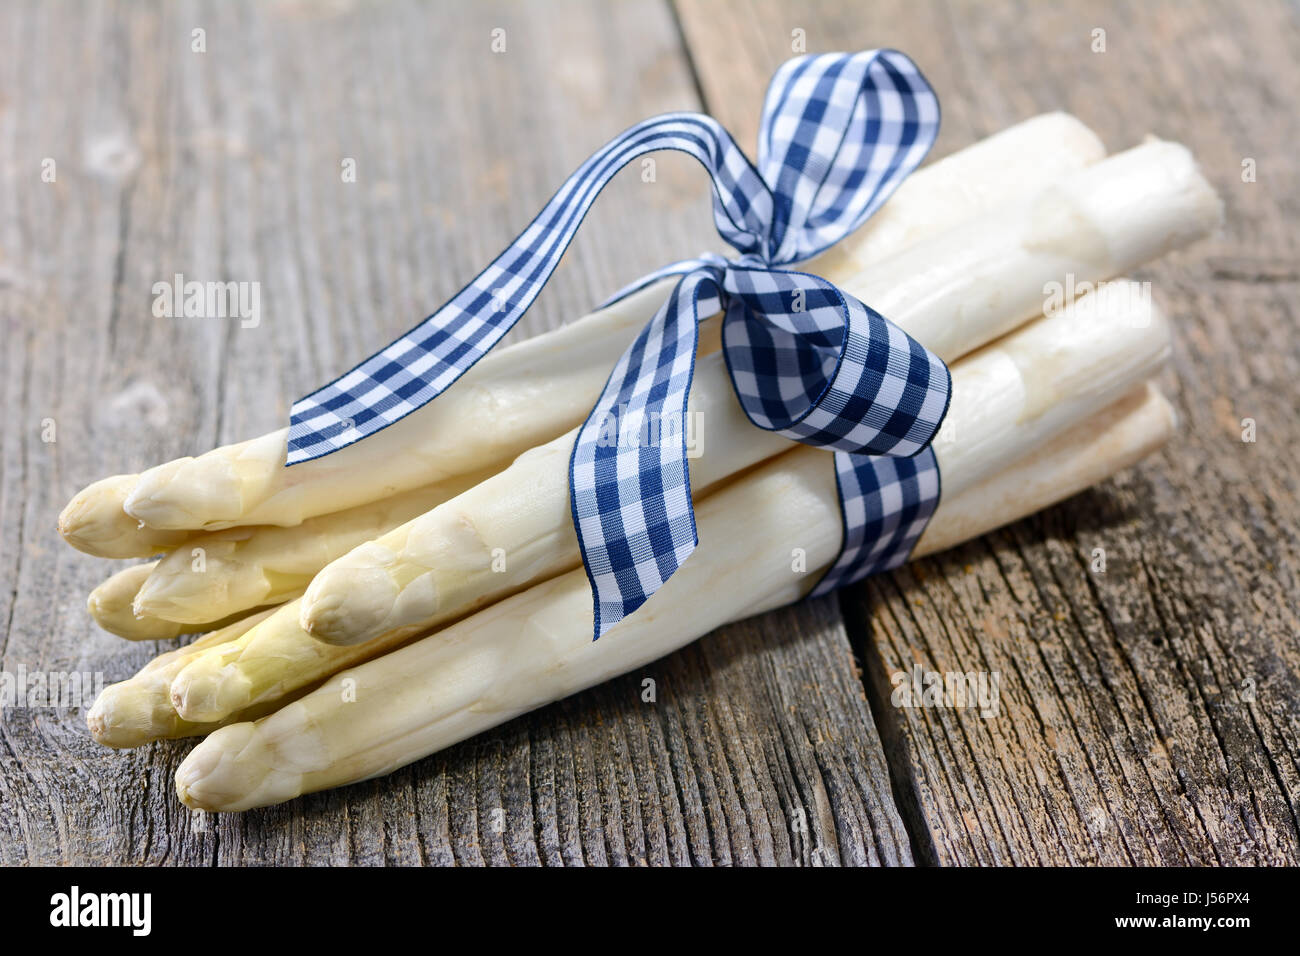 A bunch of white asparagus from Germany on a wooden table Stock Photo